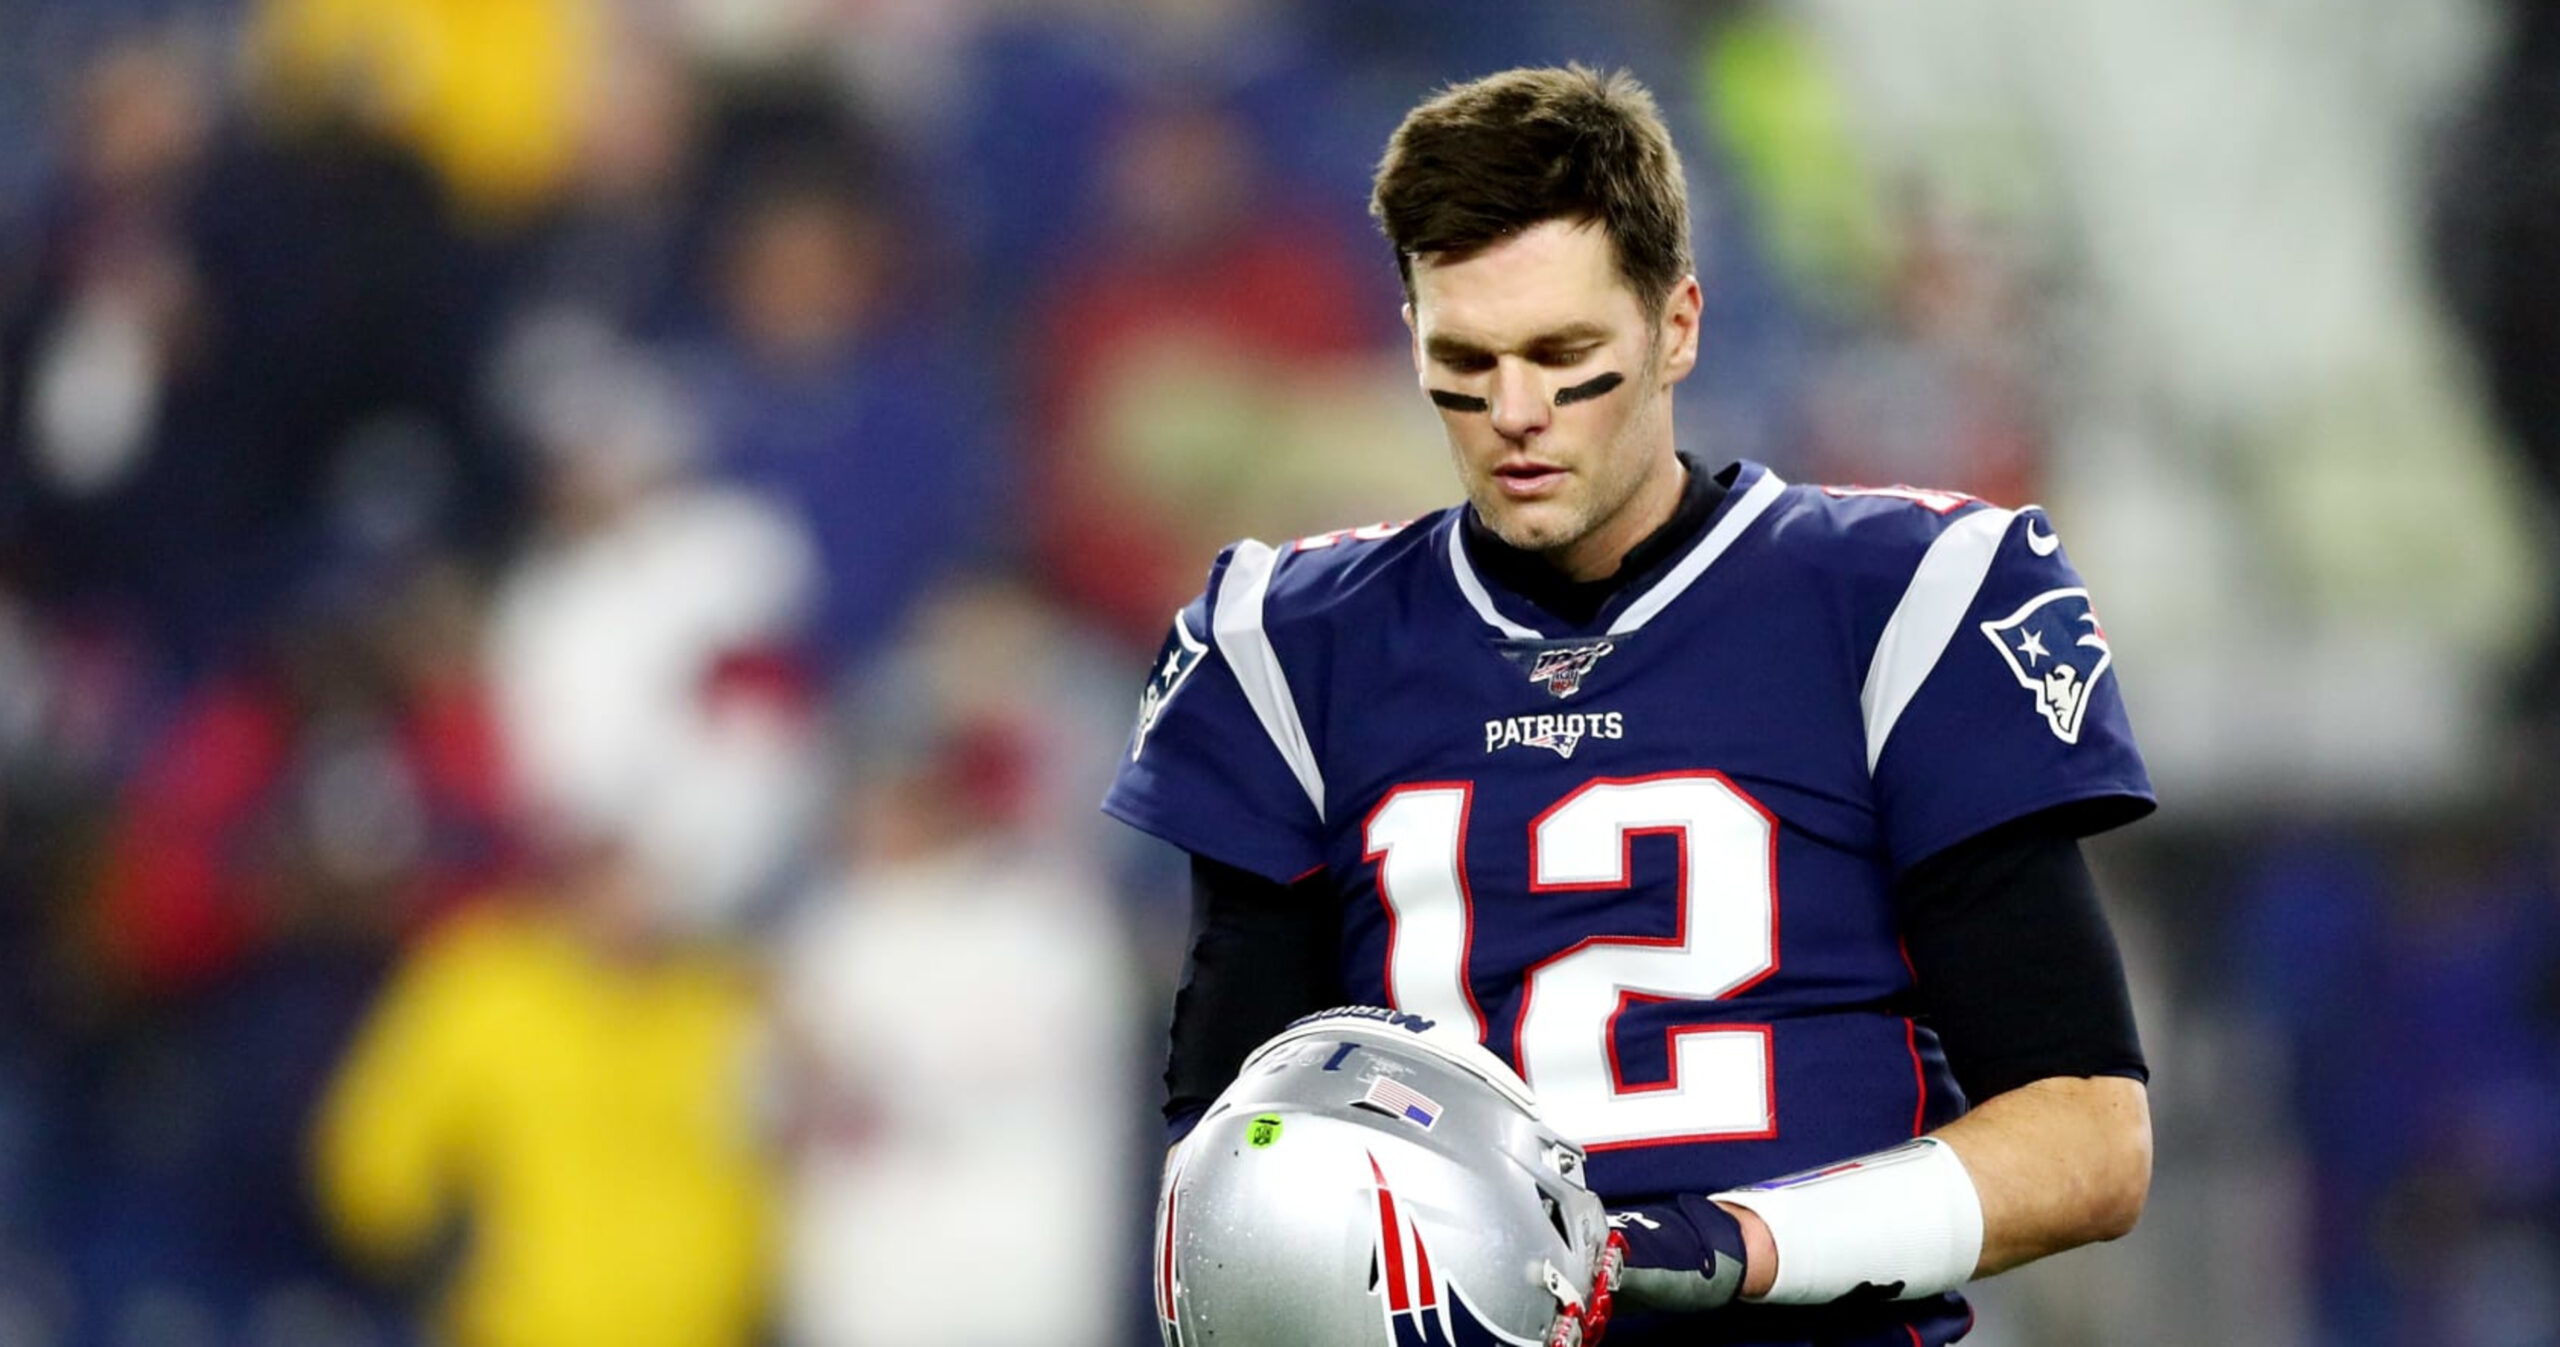 NFL Contract Negotiator Says Tom Brady ‘Didn’t Really Take Less Money Until the End’